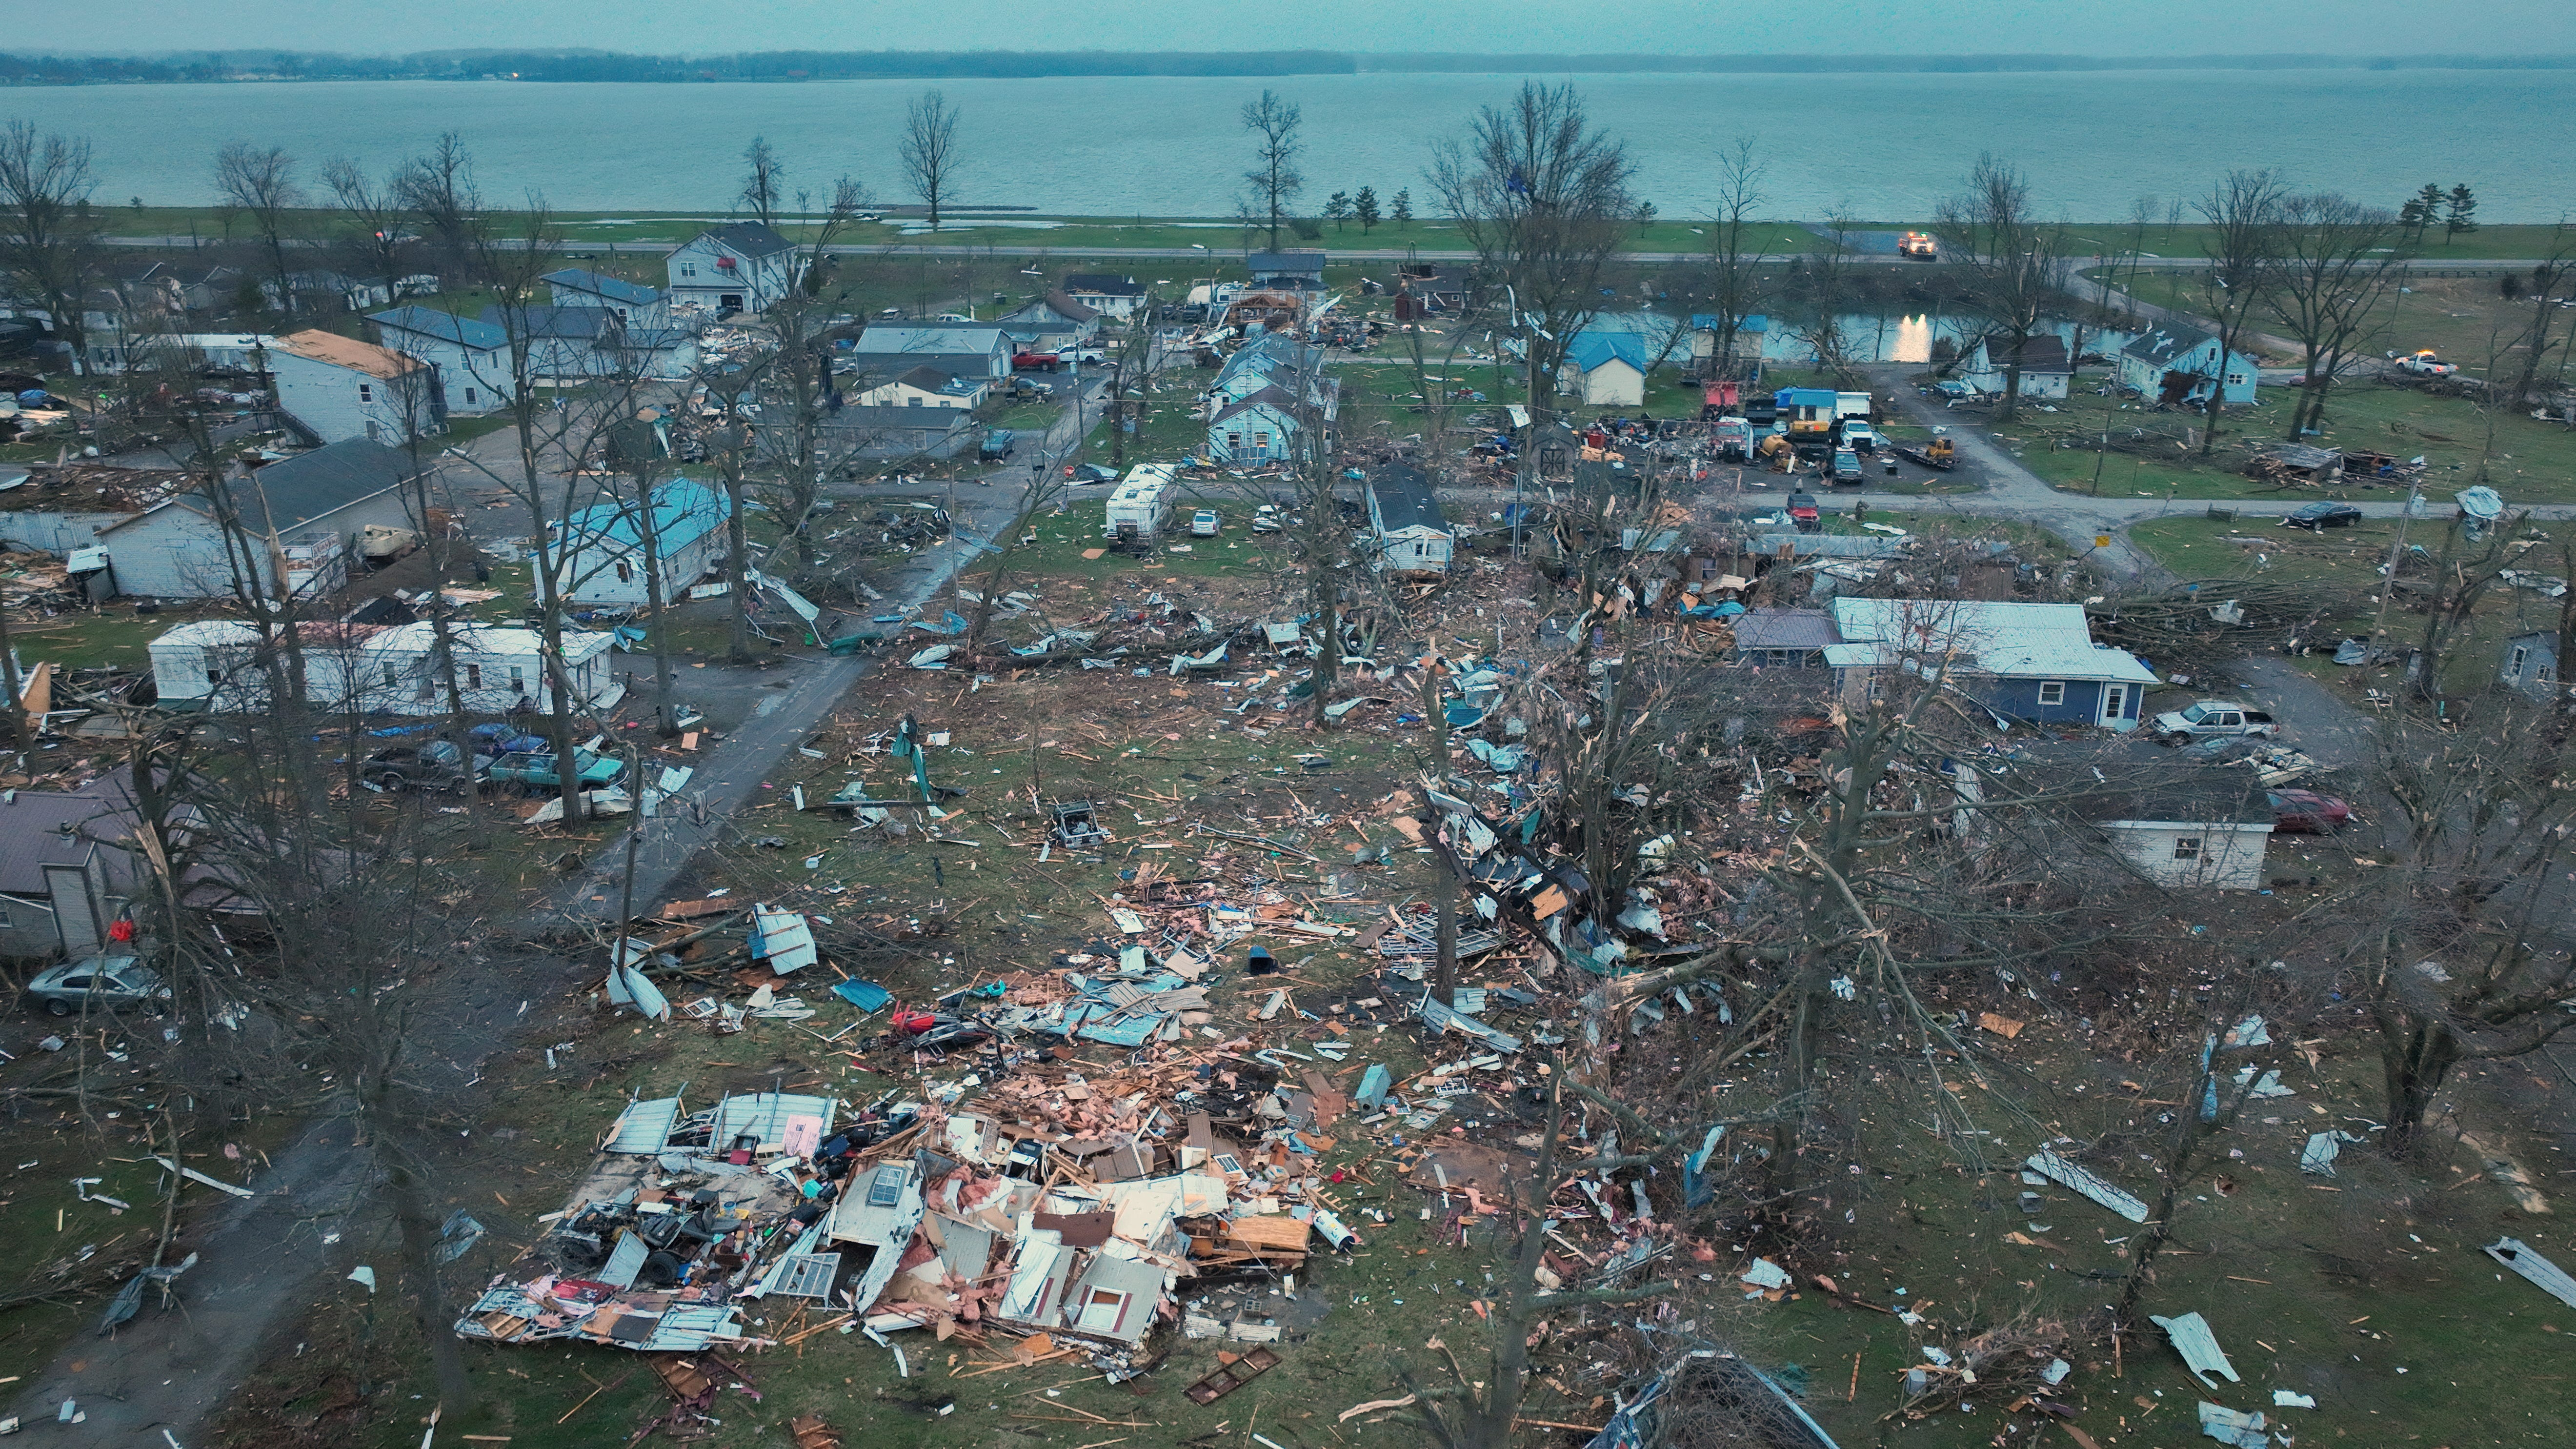 One or more tornadoes kill three, injure dozens in Ohio, Indiana